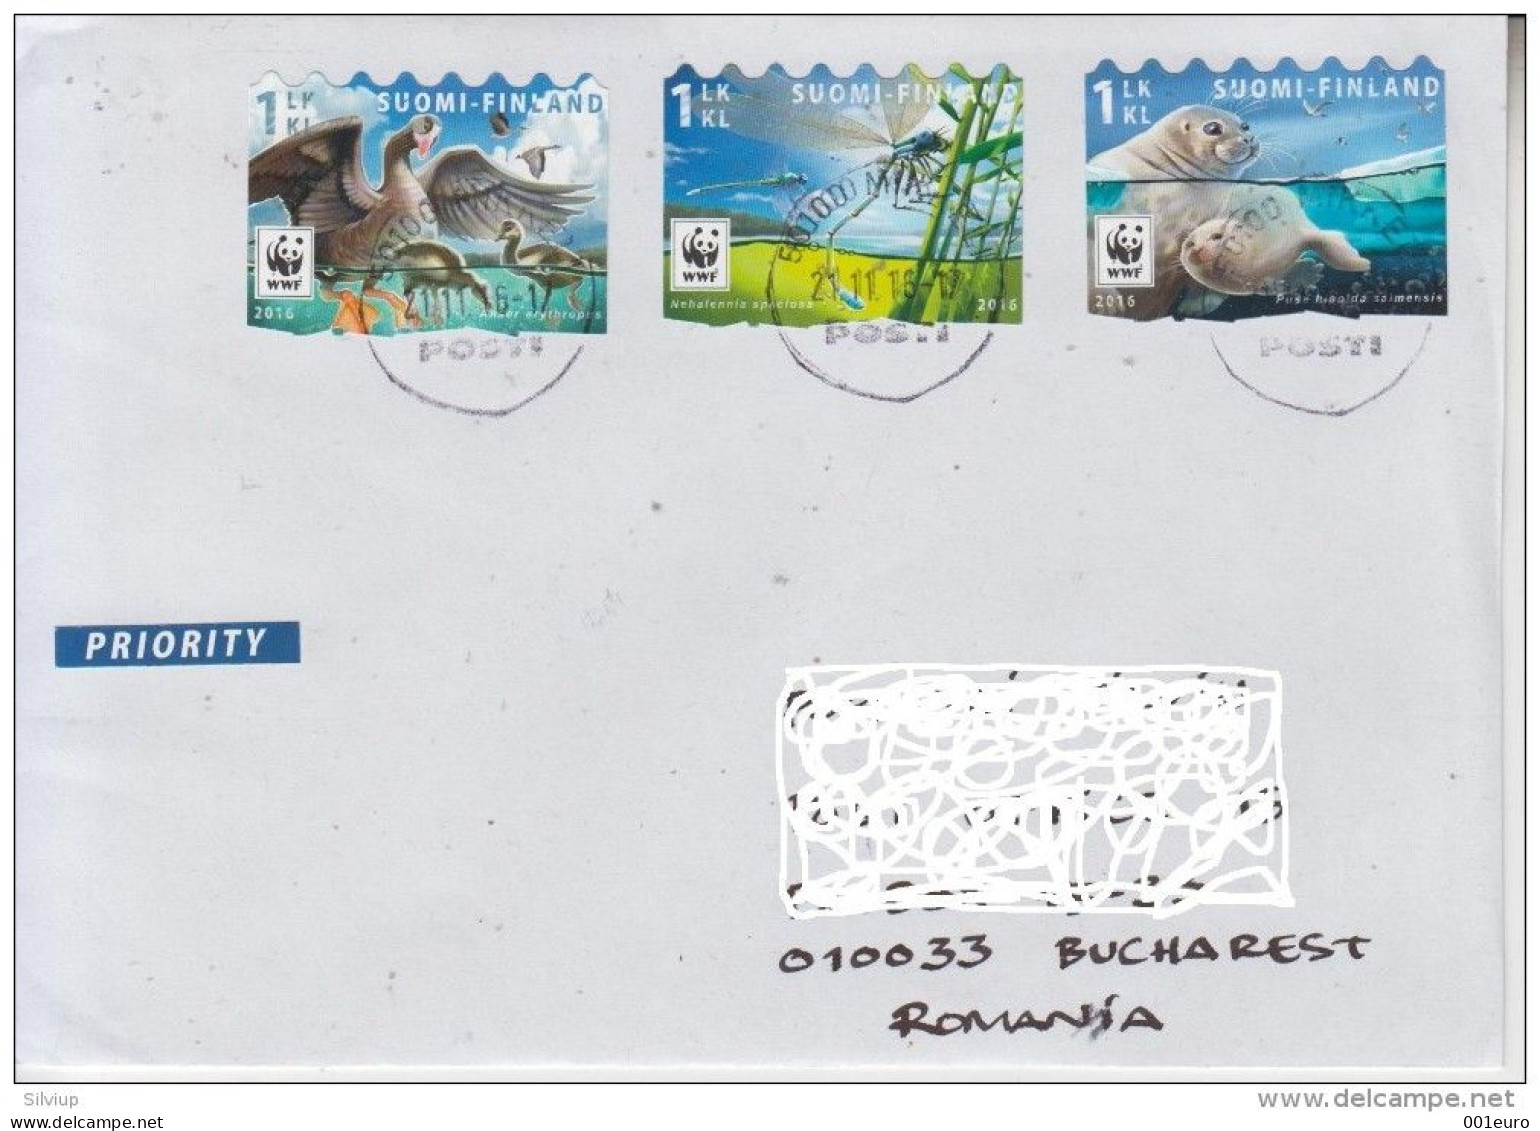 FINLAND : W.W.F - FAUNA Self Adhesive Stamps On Cover Circulated #413825060 - Registered Shipping! - Usados